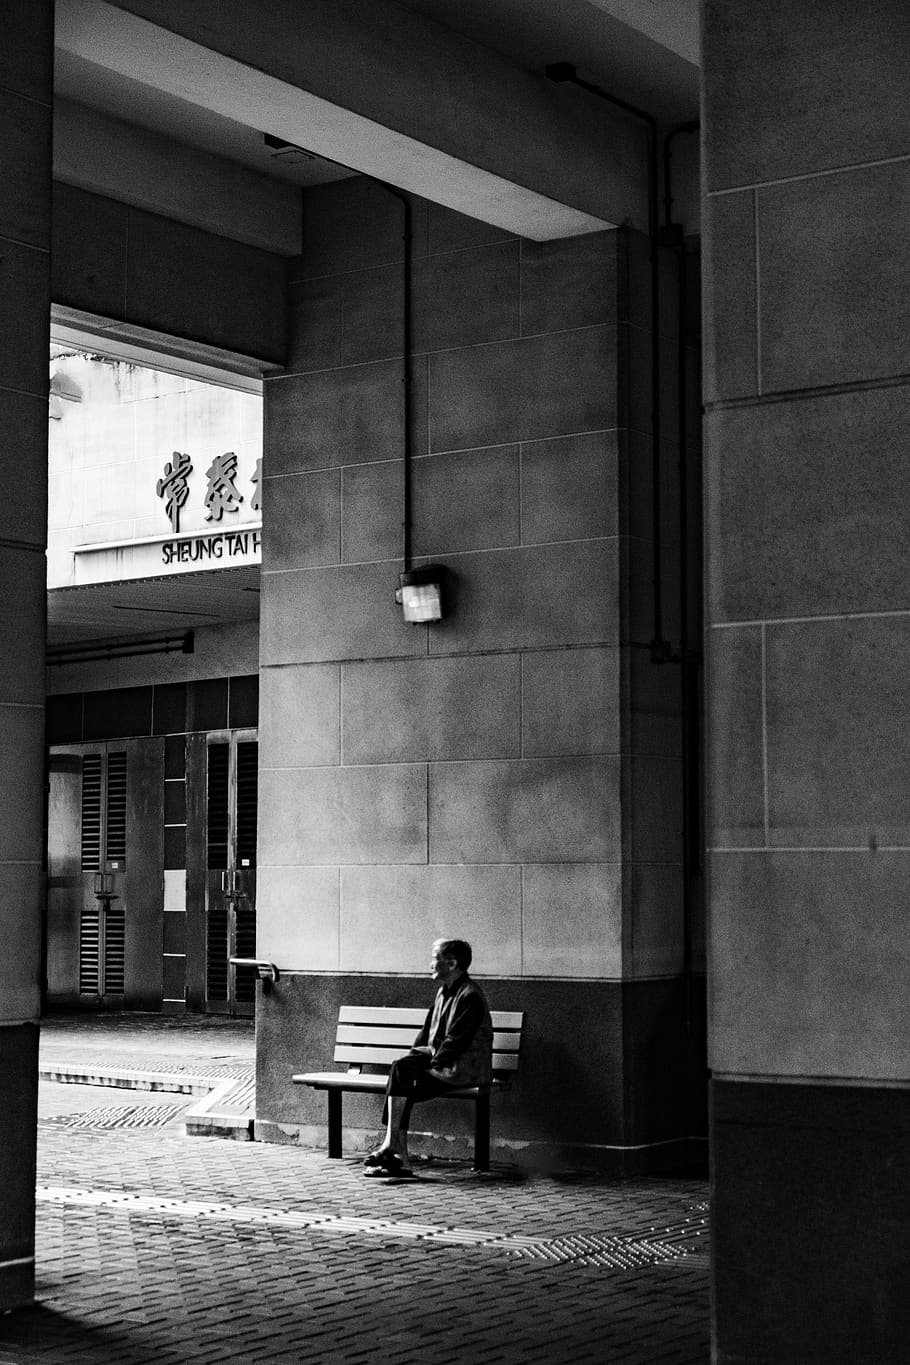 hong kong, the old man, kowloon bay, asia, old woman, black and white, alone, architecture, built structure, sitting